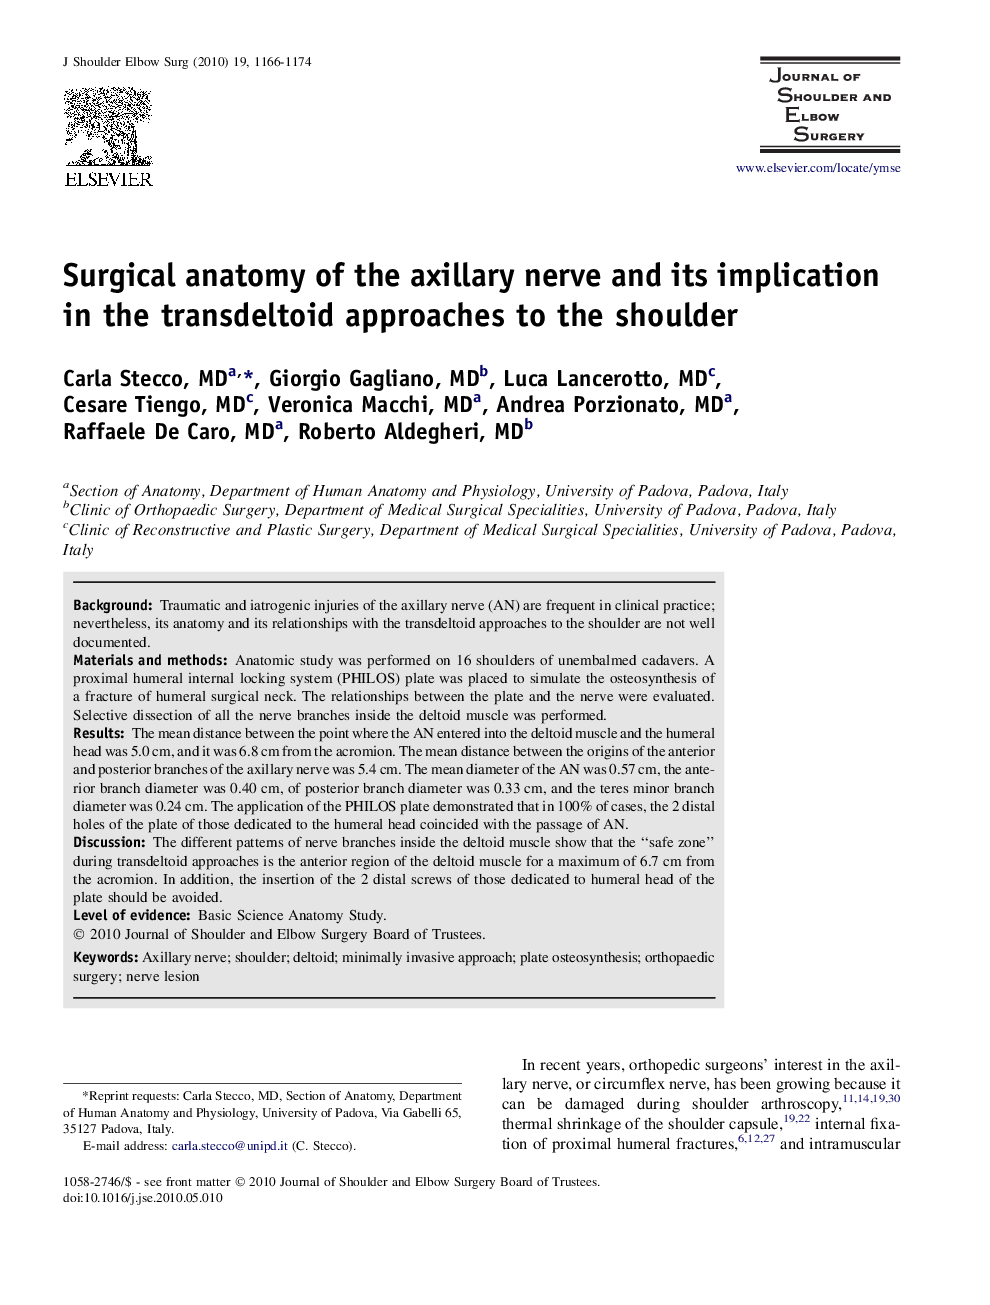 Surgical anatomy of the axillary nerve and its implication in the transdeltoid approaches to the shoulder